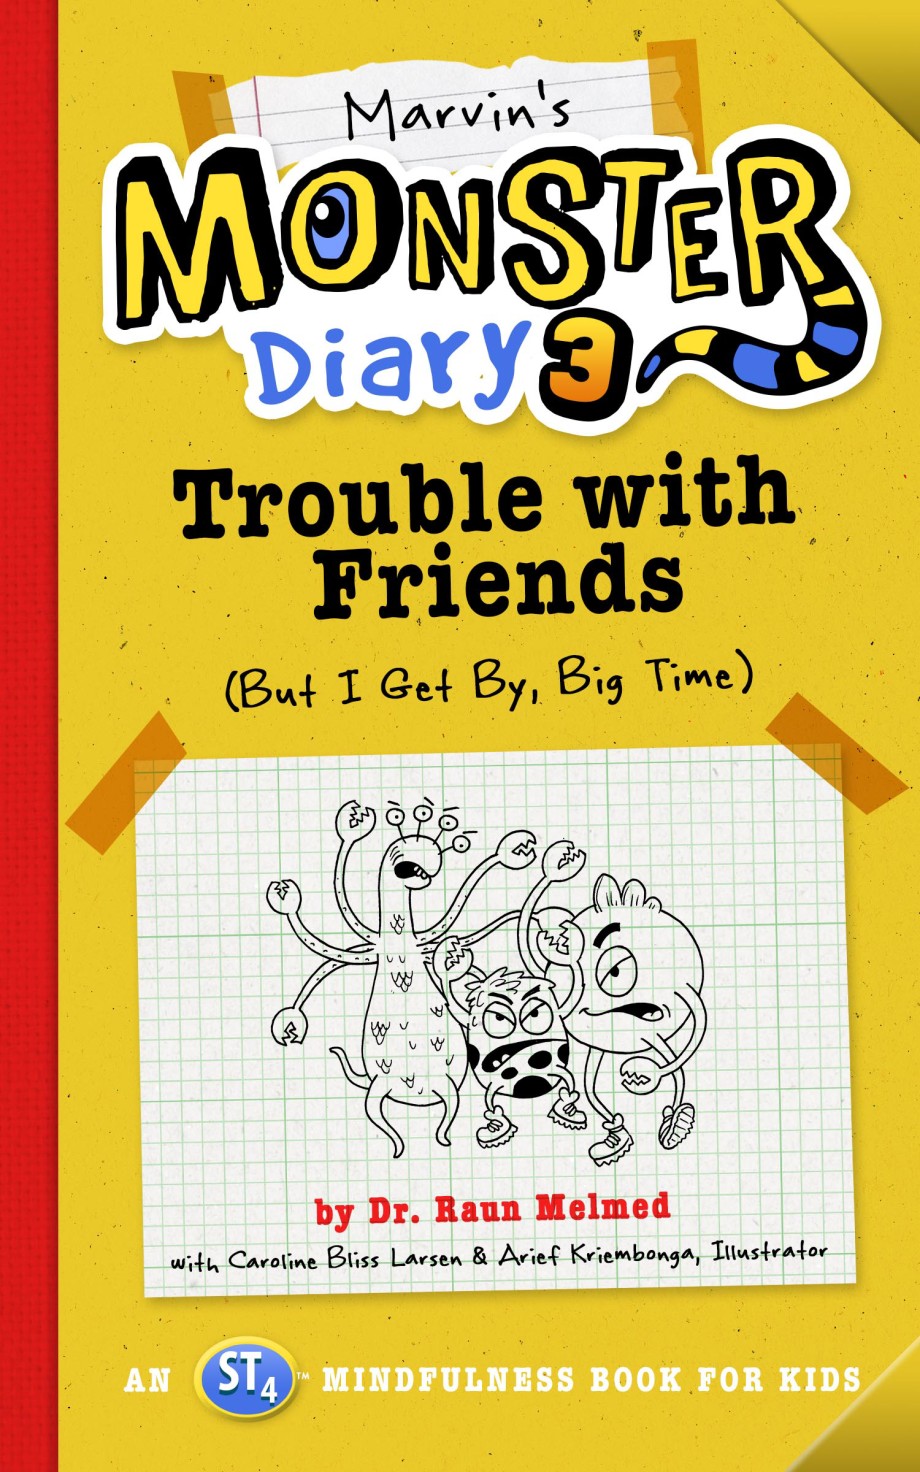 Marvin's Monster Diary 3 Trouble with Friends (But I Get By, Big Time!) An ST4 Mindfulness Book for Kids